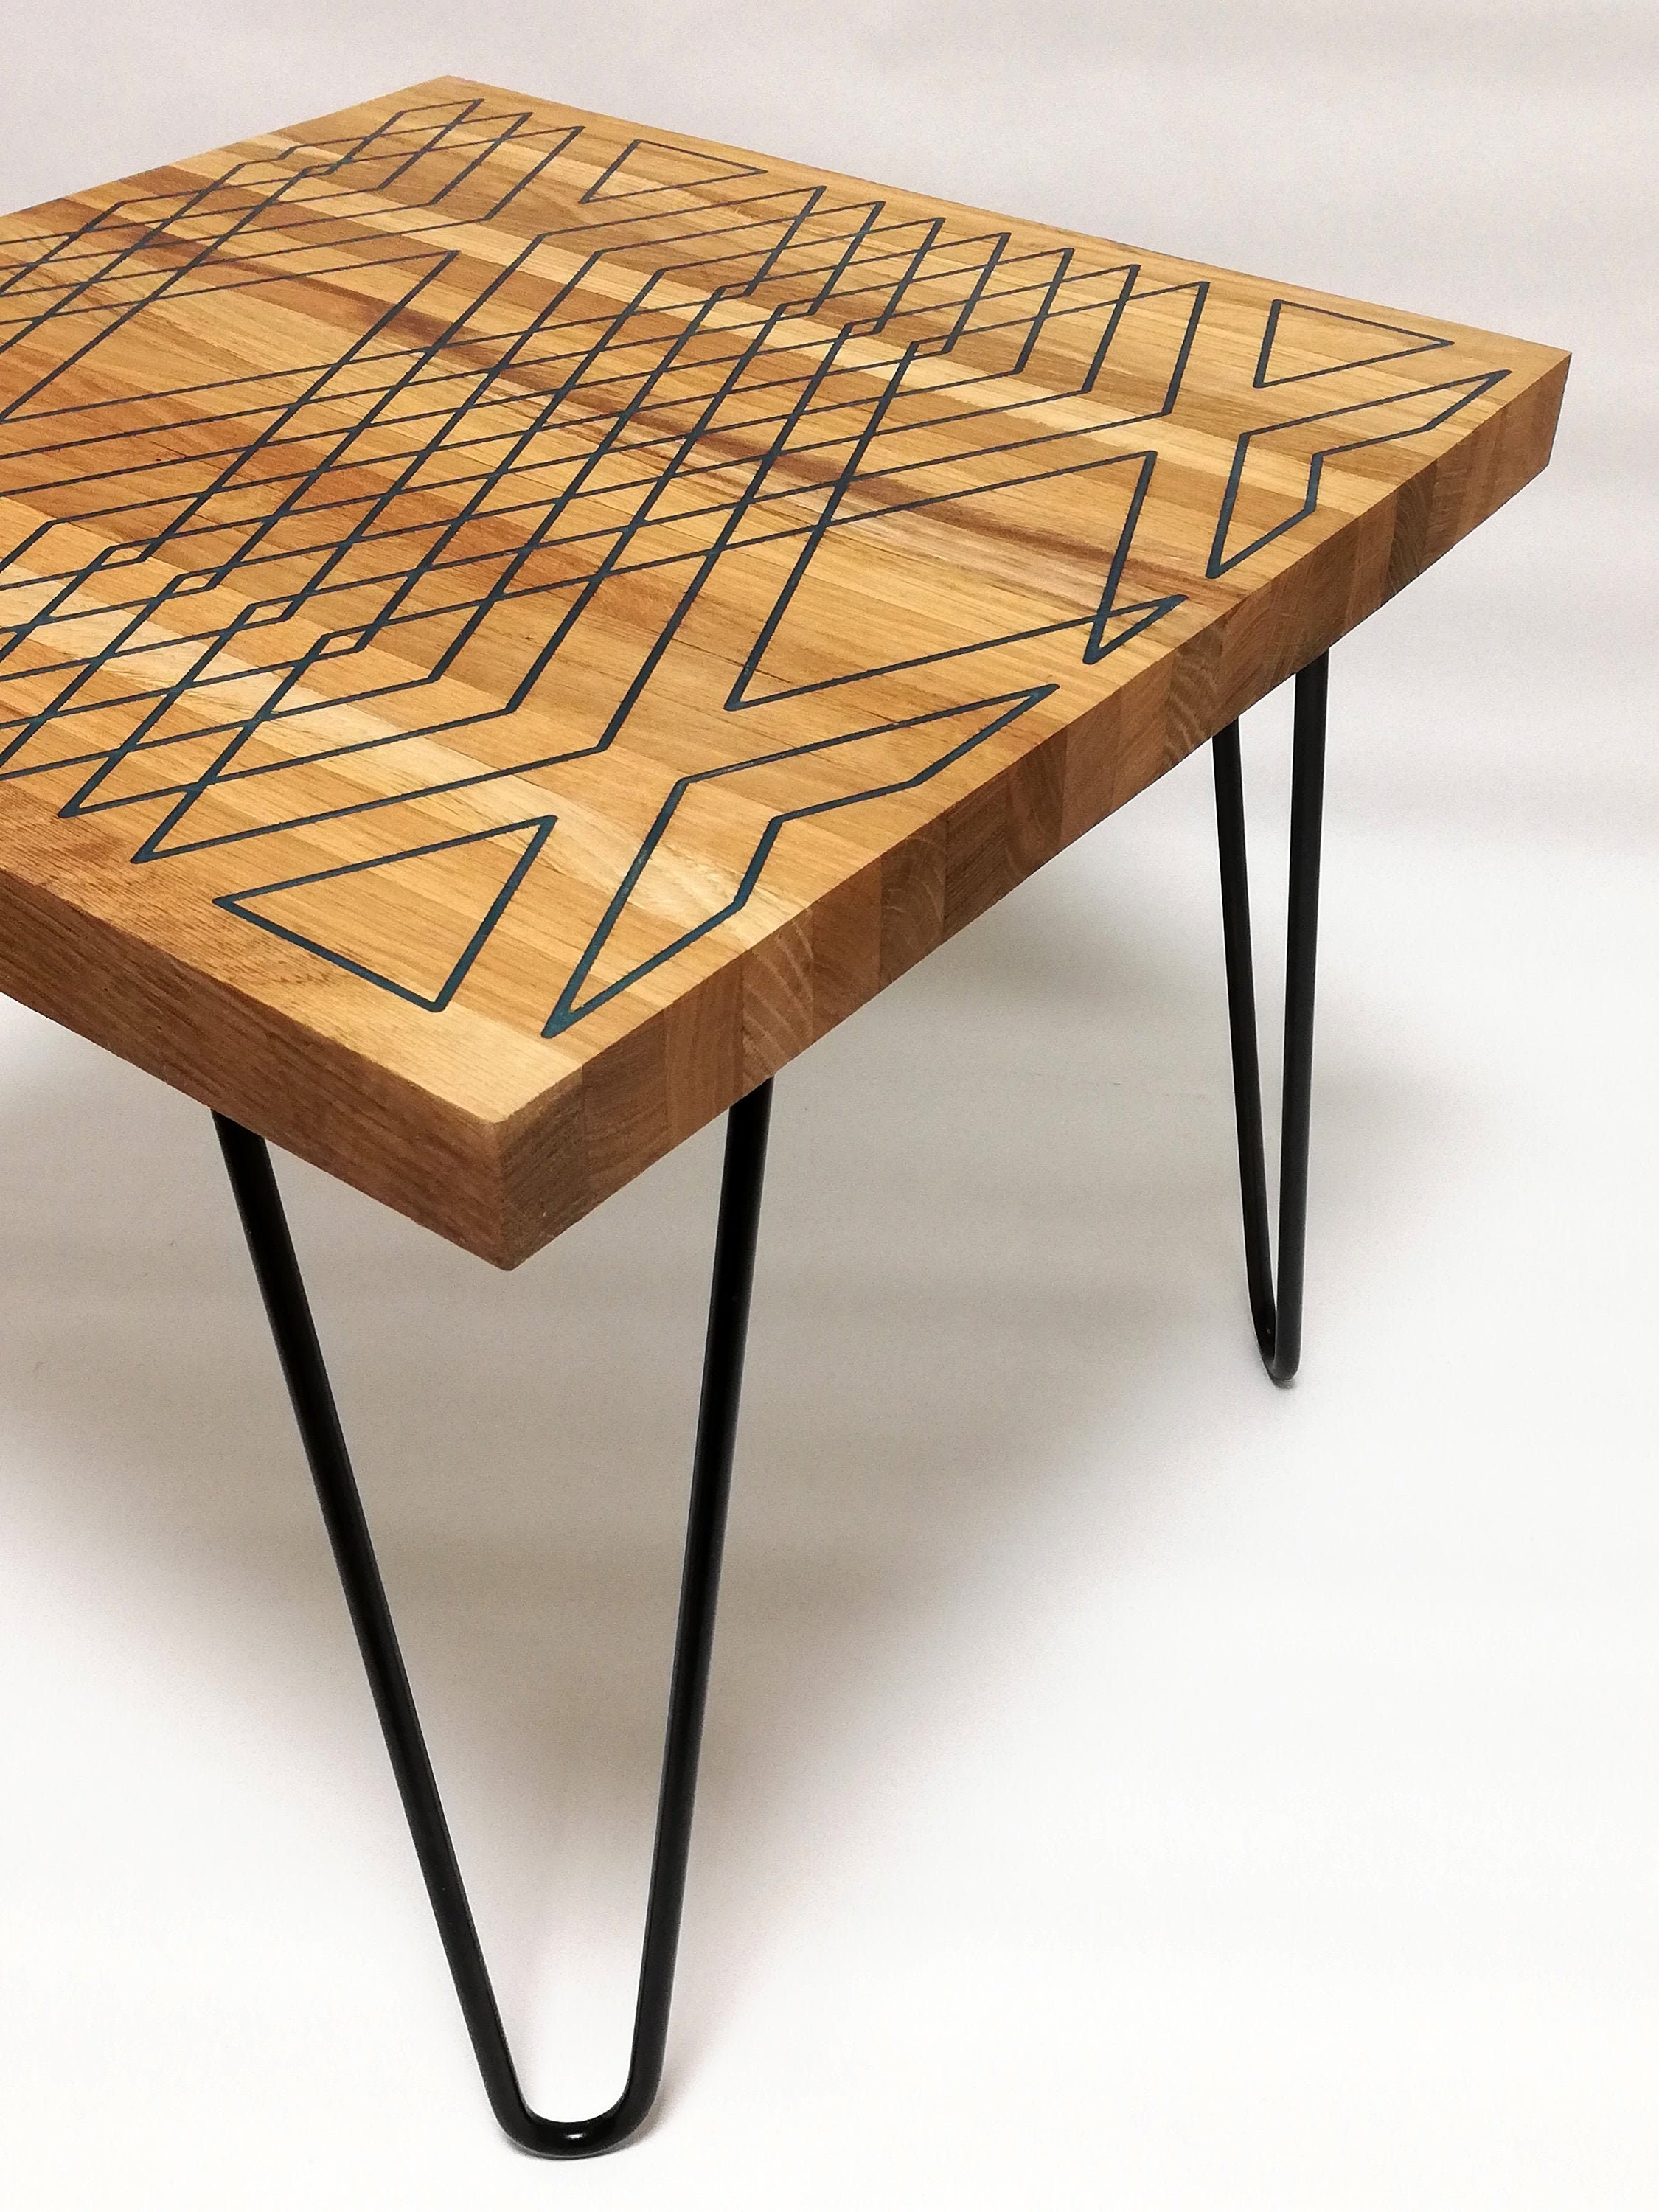 Facilities toothache block Geometric Wood Table - Etsy